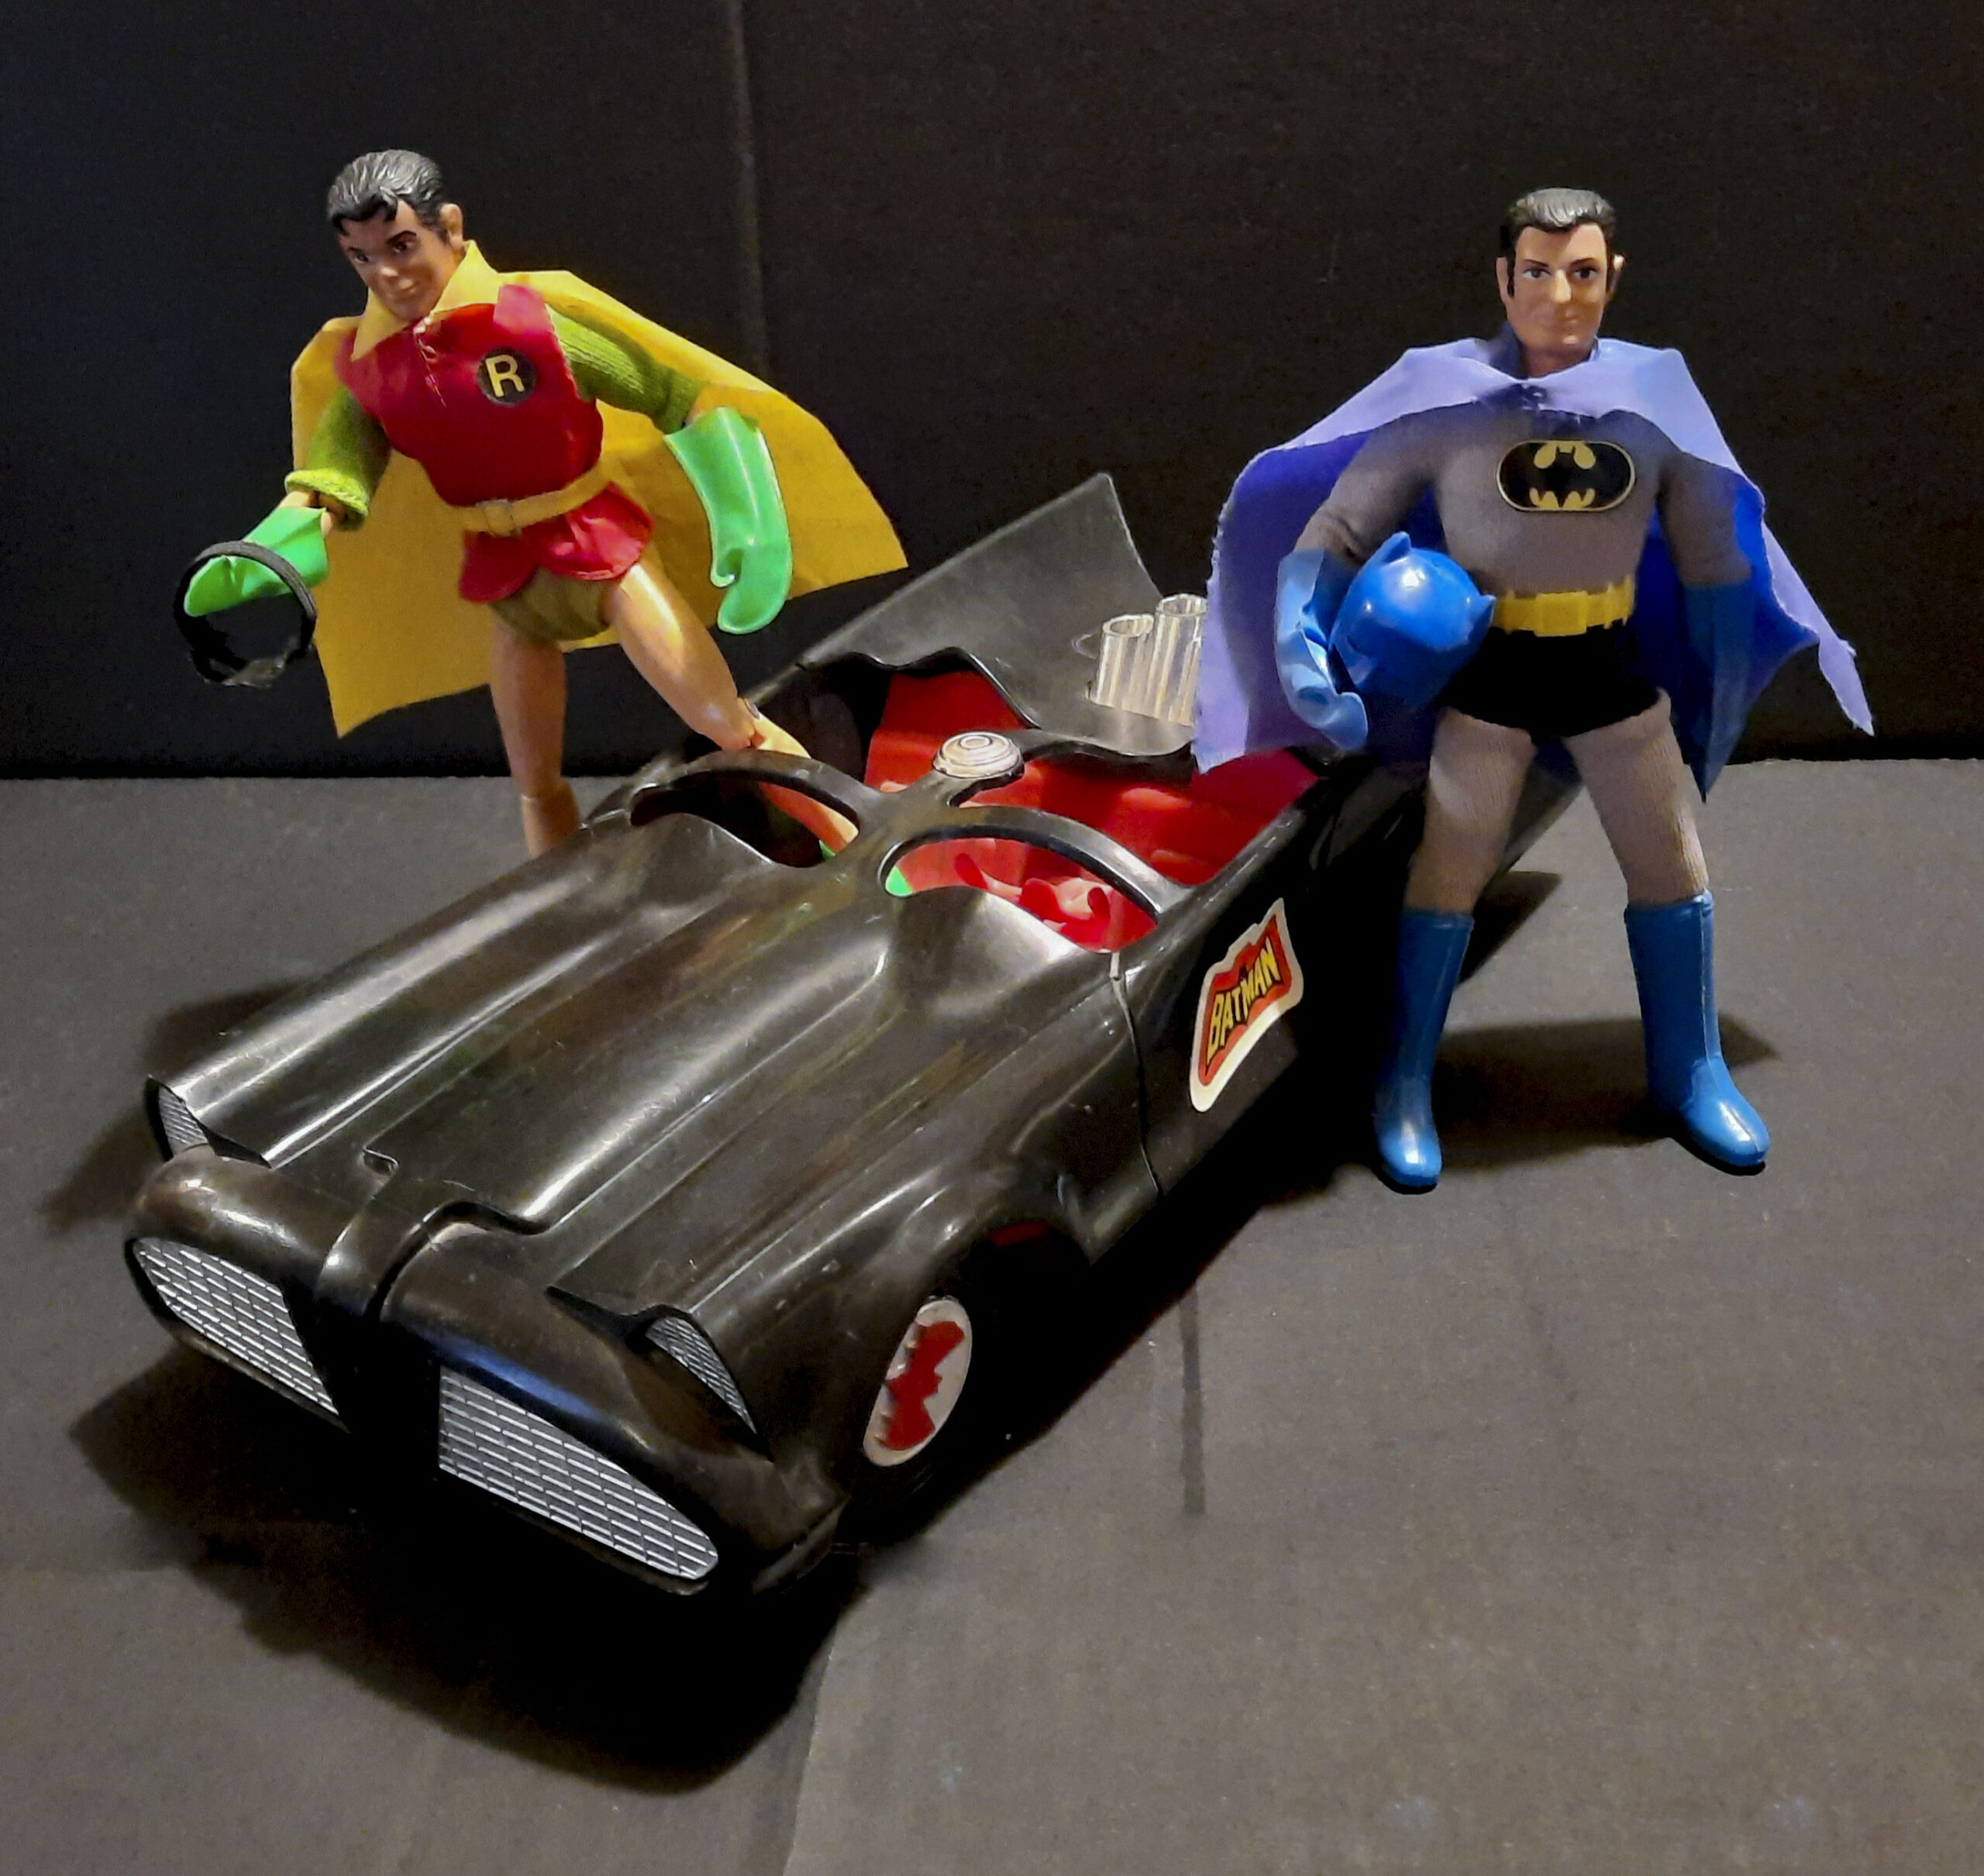 Amazing Spidercar: WGSH Gallery: Mego Museum